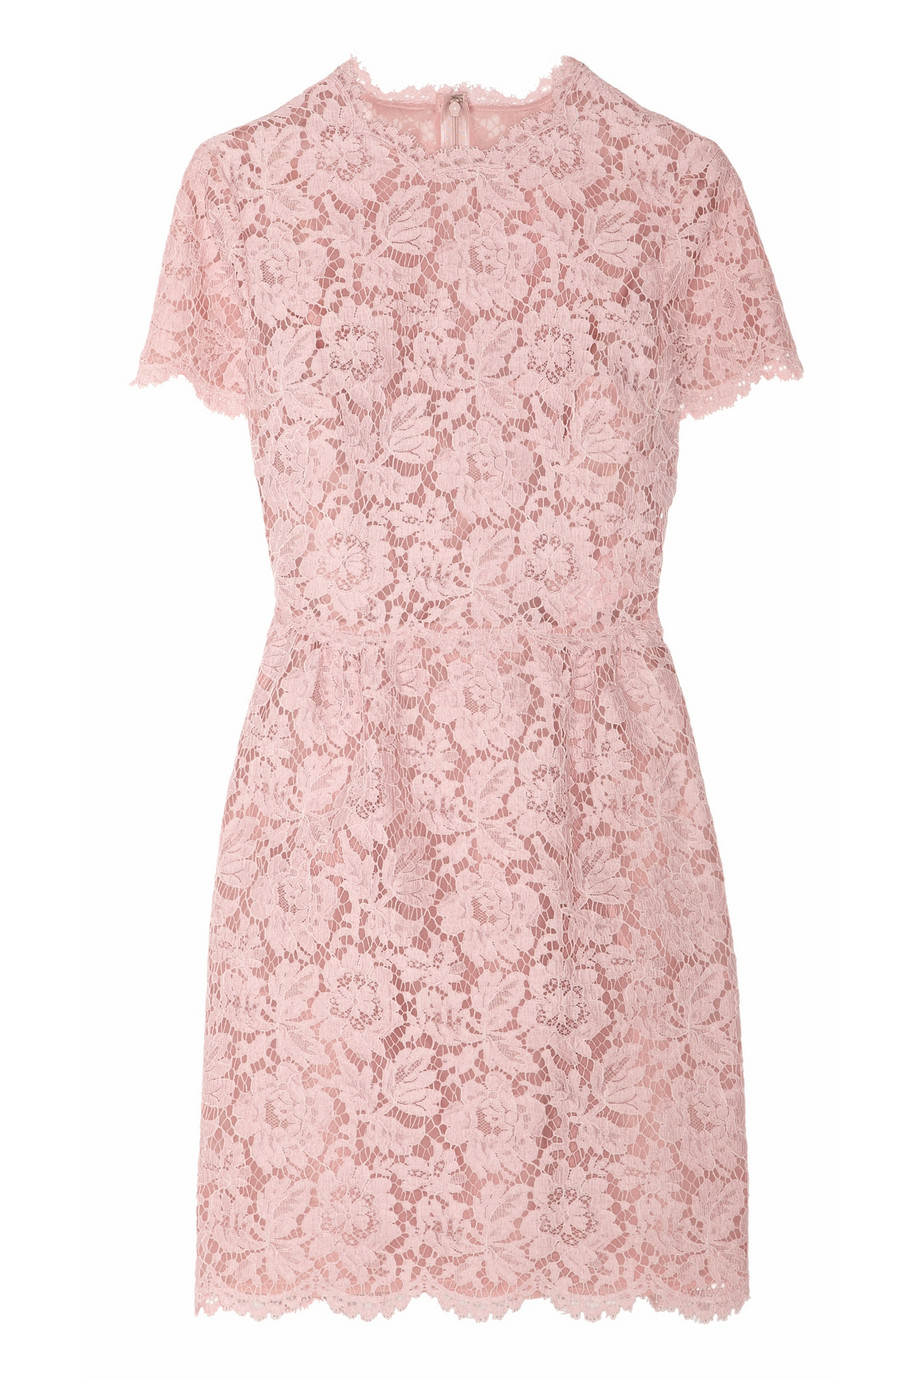 Valentino Cotton Blend Lace Mini Dress in Pink - Lyst